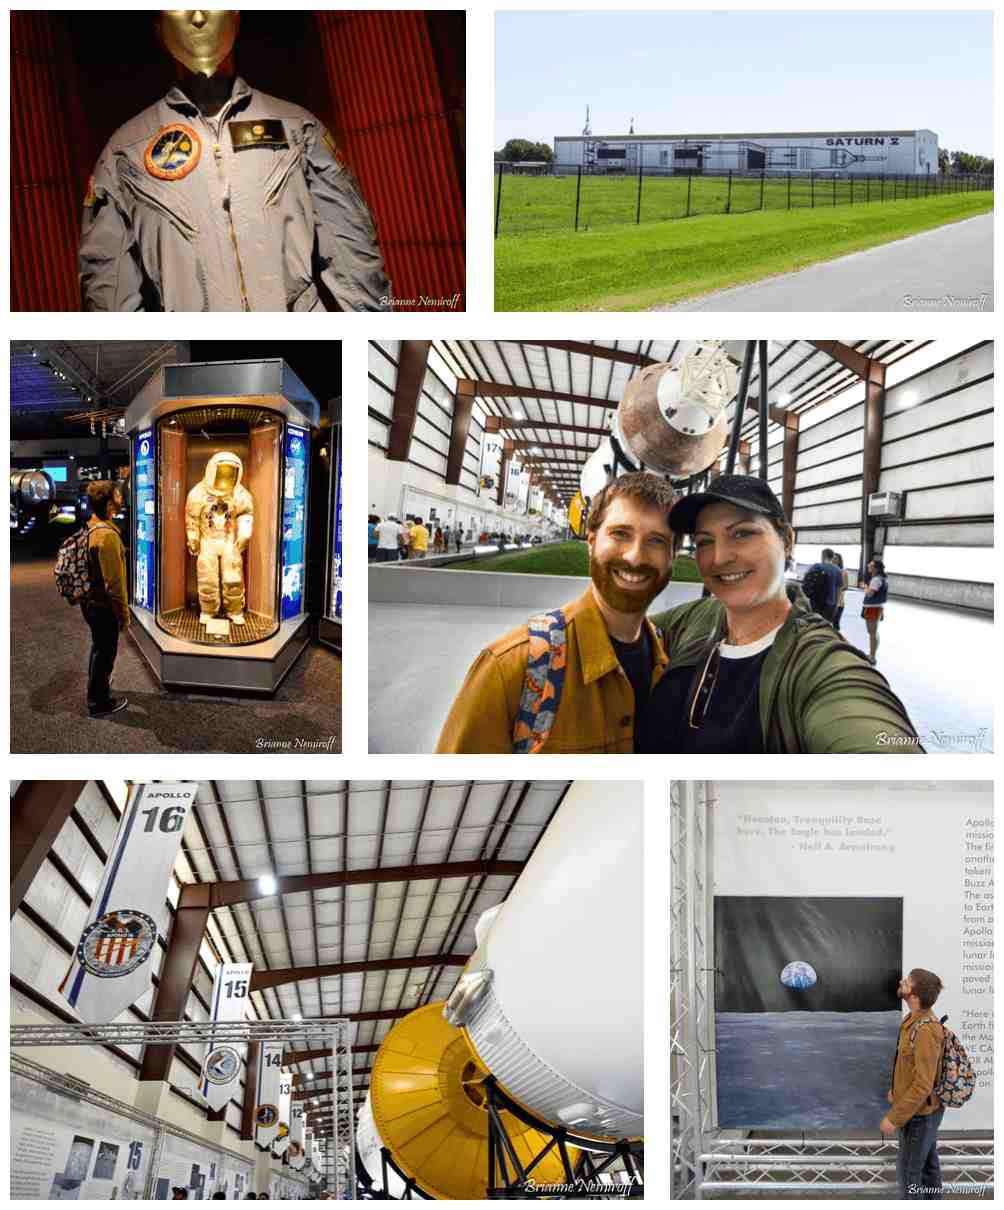 48 Hours in Houston, Texas- It's Bree and Ben - NASA - Space Center Houston